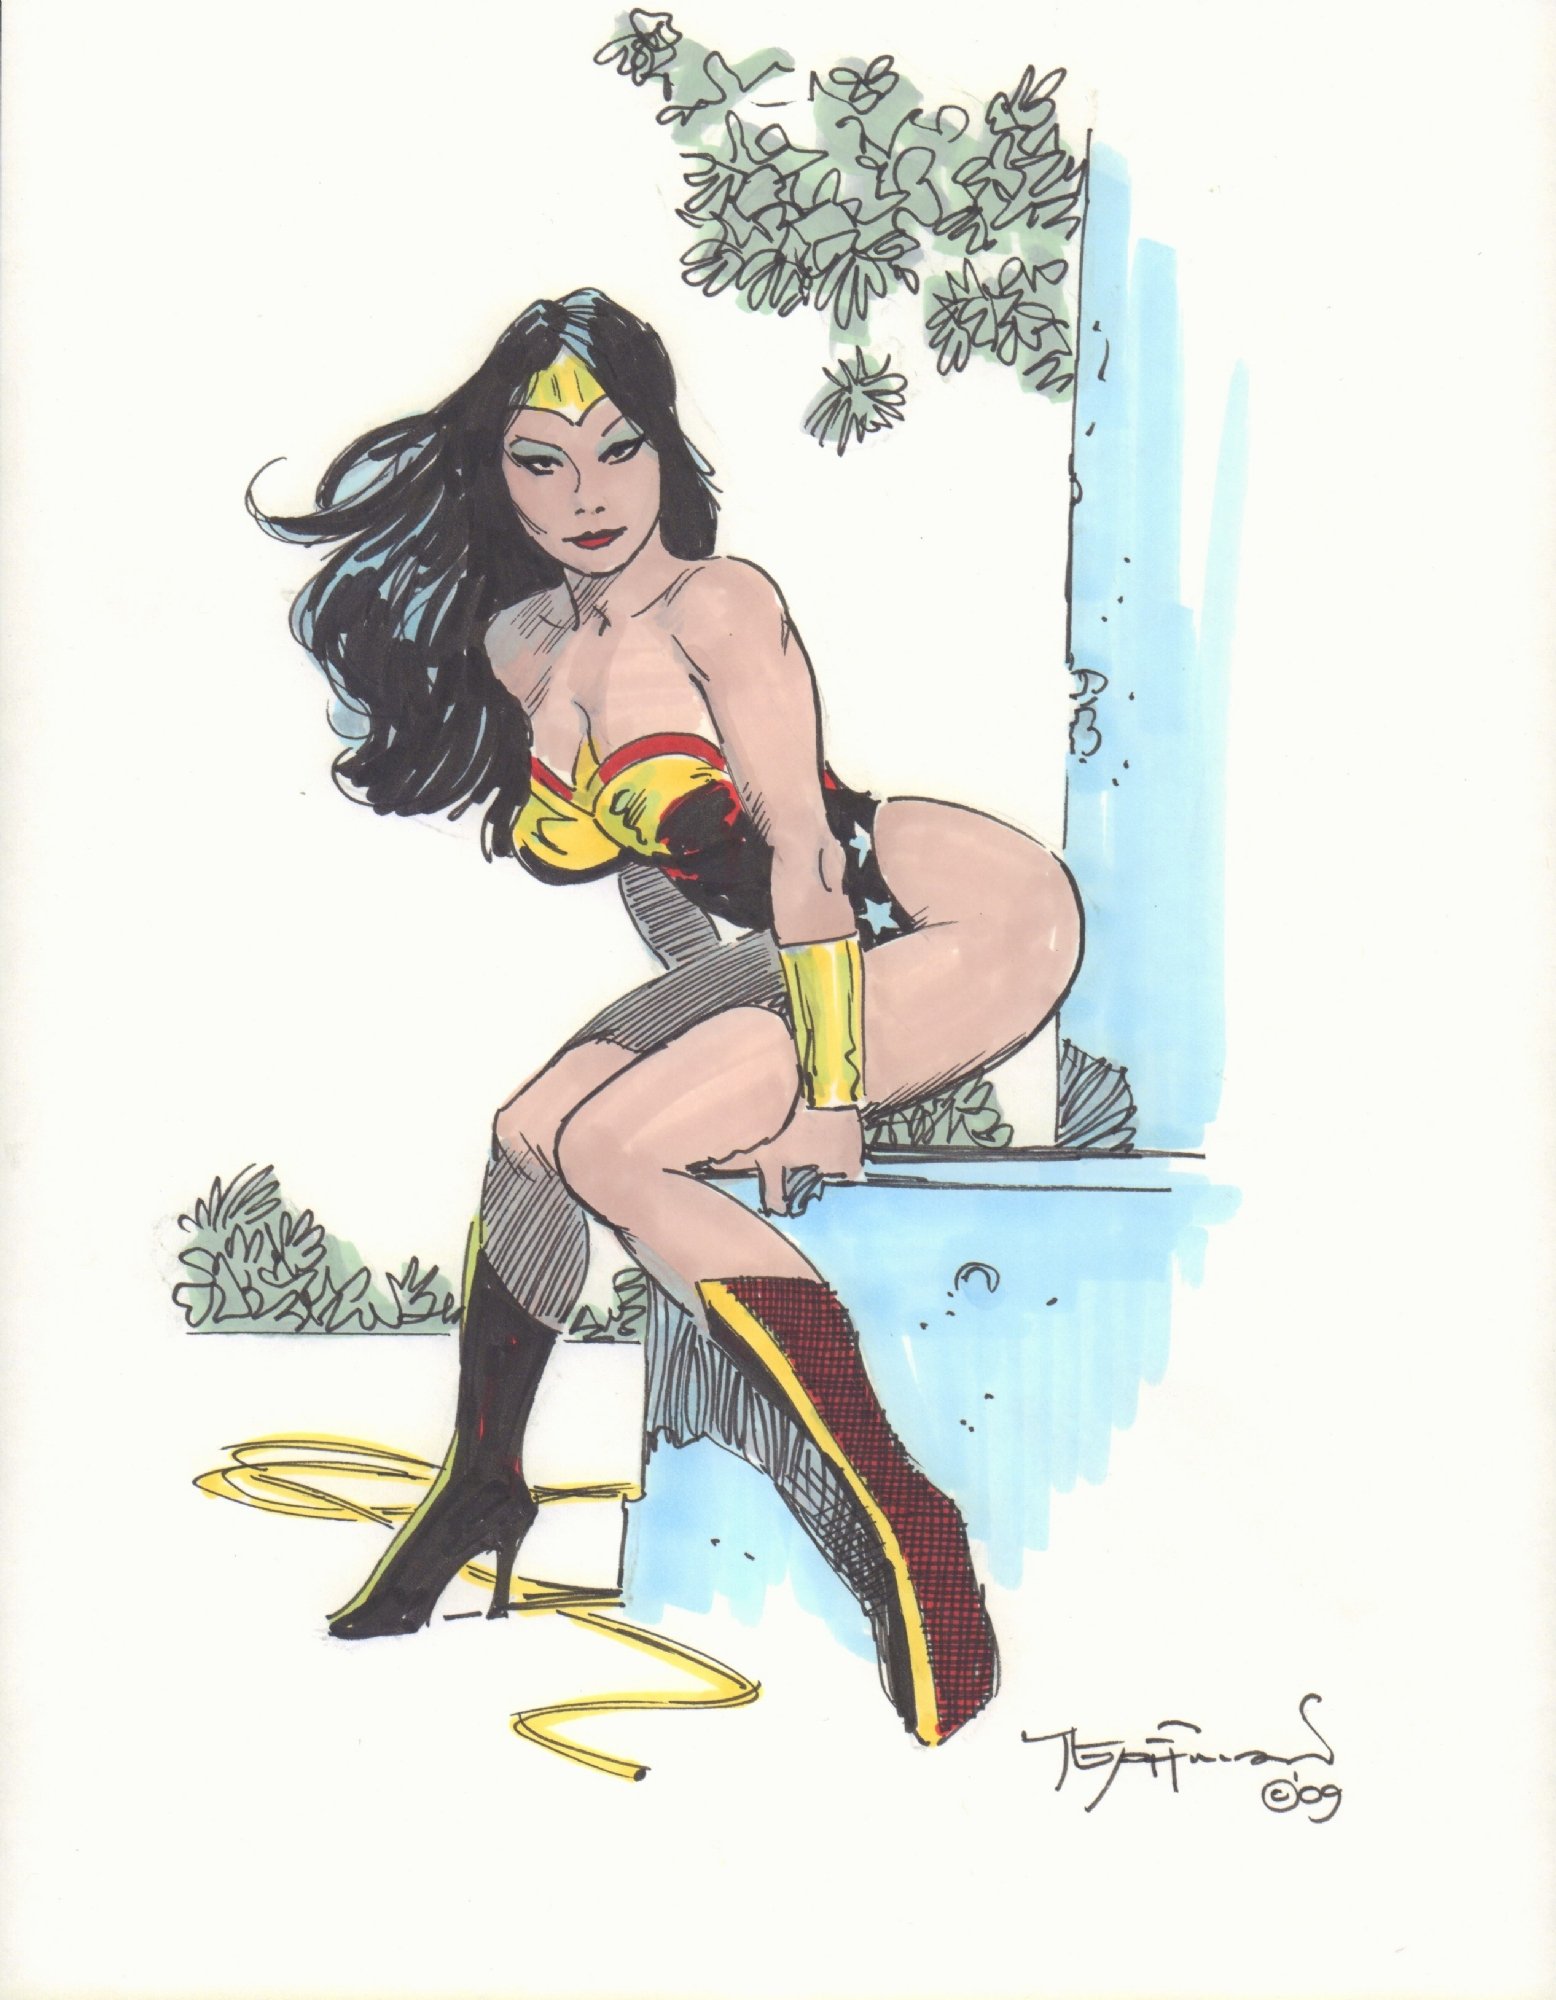 digital-seal347: Wonder Woman without clothes spreading legs